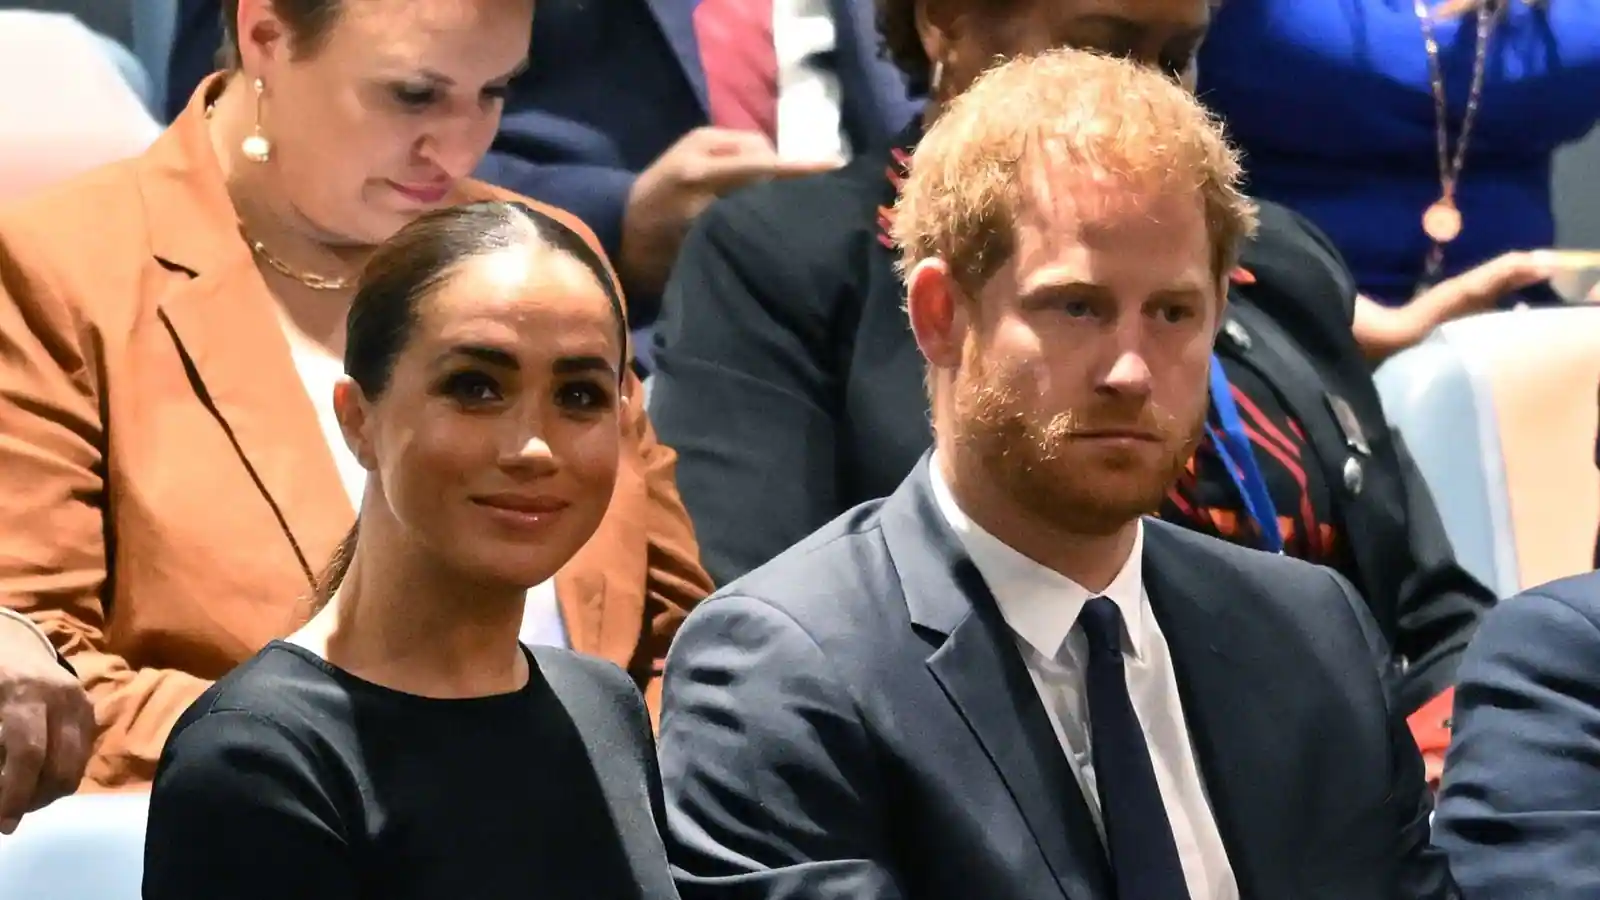 Hollywood celebrities reportedly avoiding Prince Harry and Meghan